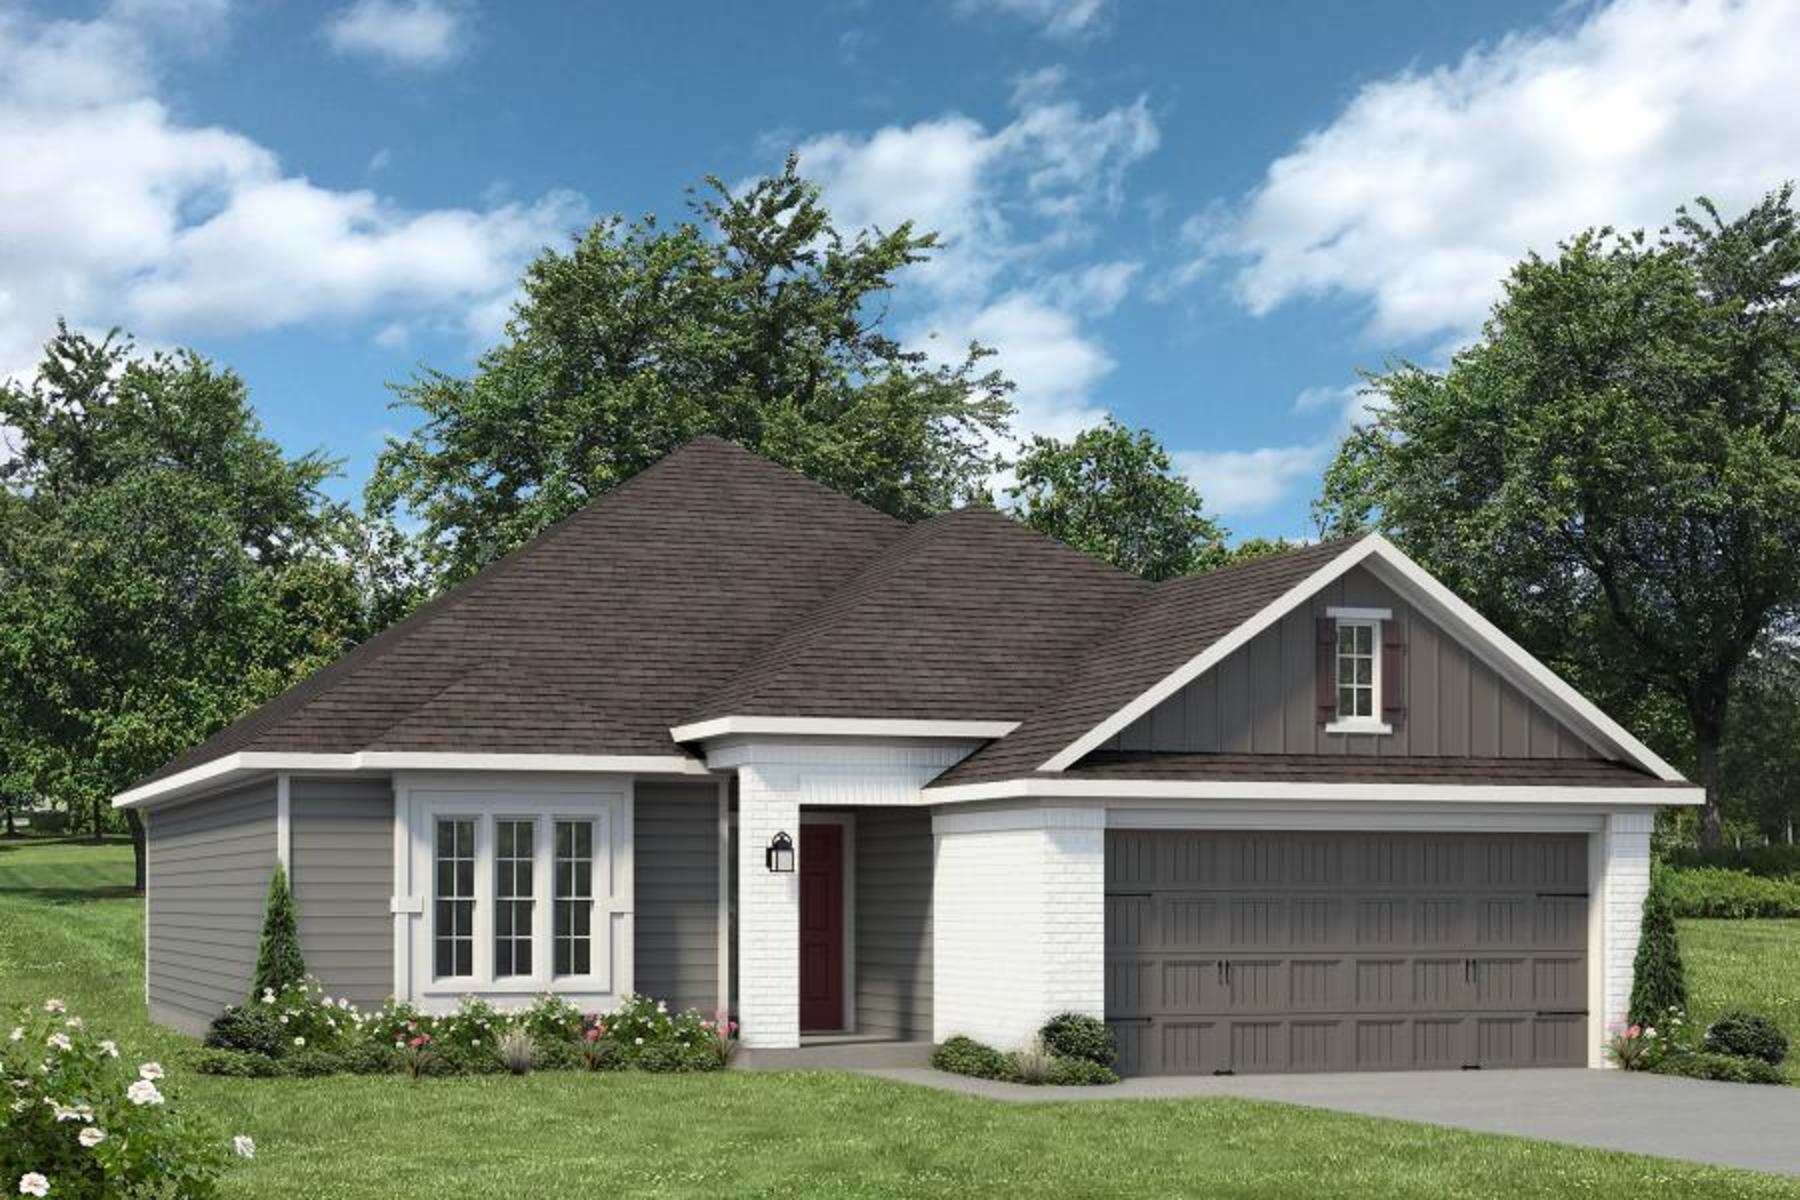 https://myhome.anewgo.com/client/stylecraft/community/Our%20Plans/plan/1613%20%7C%20Blakely%20Modern?elevId=89. 1,620sf New Home